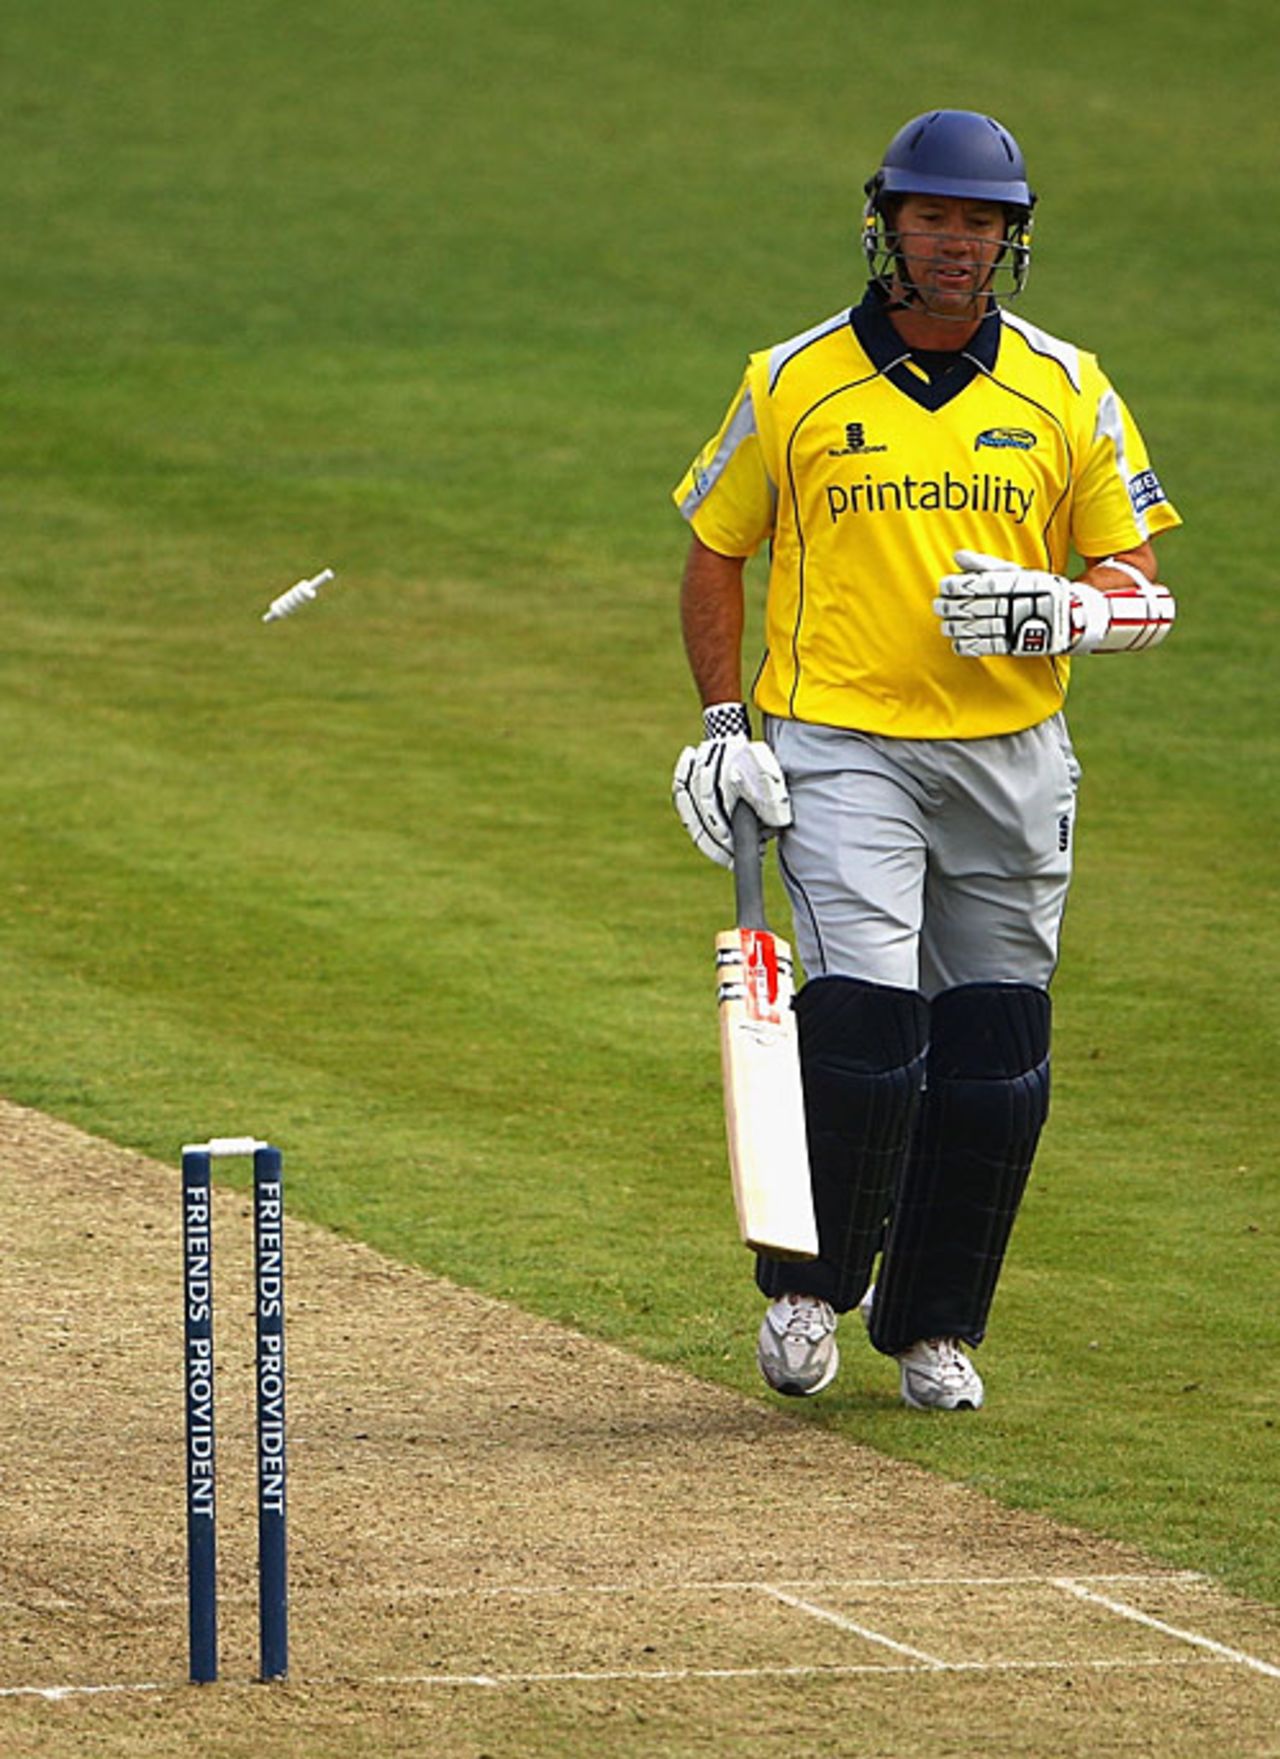 Stuart Law is comfortably short of his ground, run out by his former county Lancashire, Lancashire v Derbyshire, Friends Provident Trophy, Old Trafford, May 3, 2009